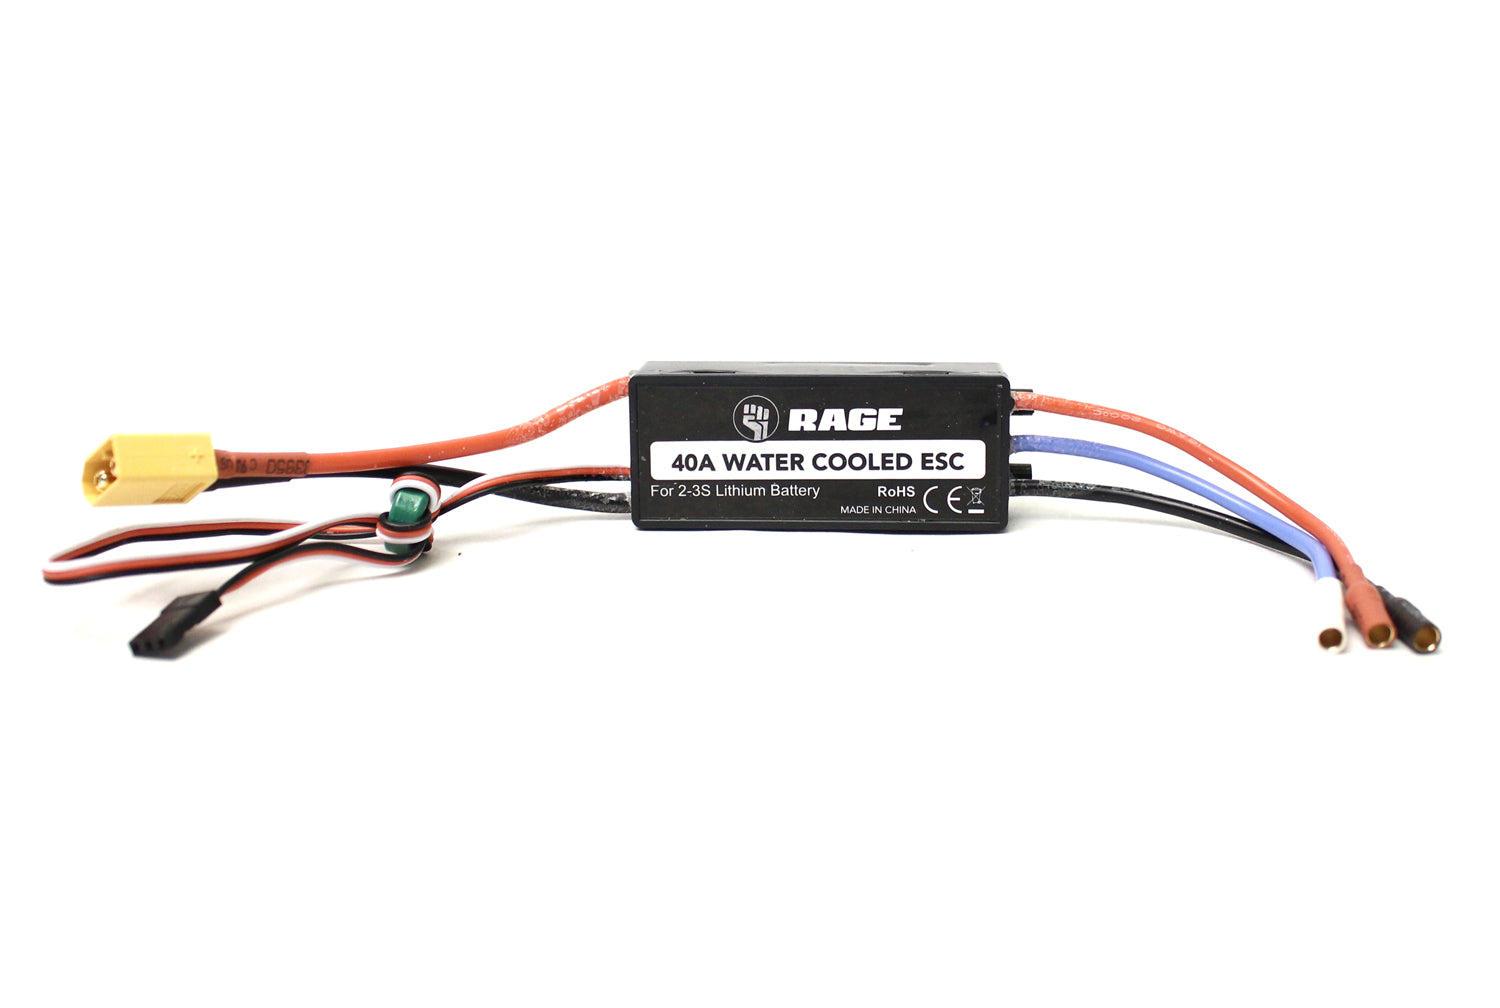 RGRB1251-Water-cooled-40a-Brushless-Esc